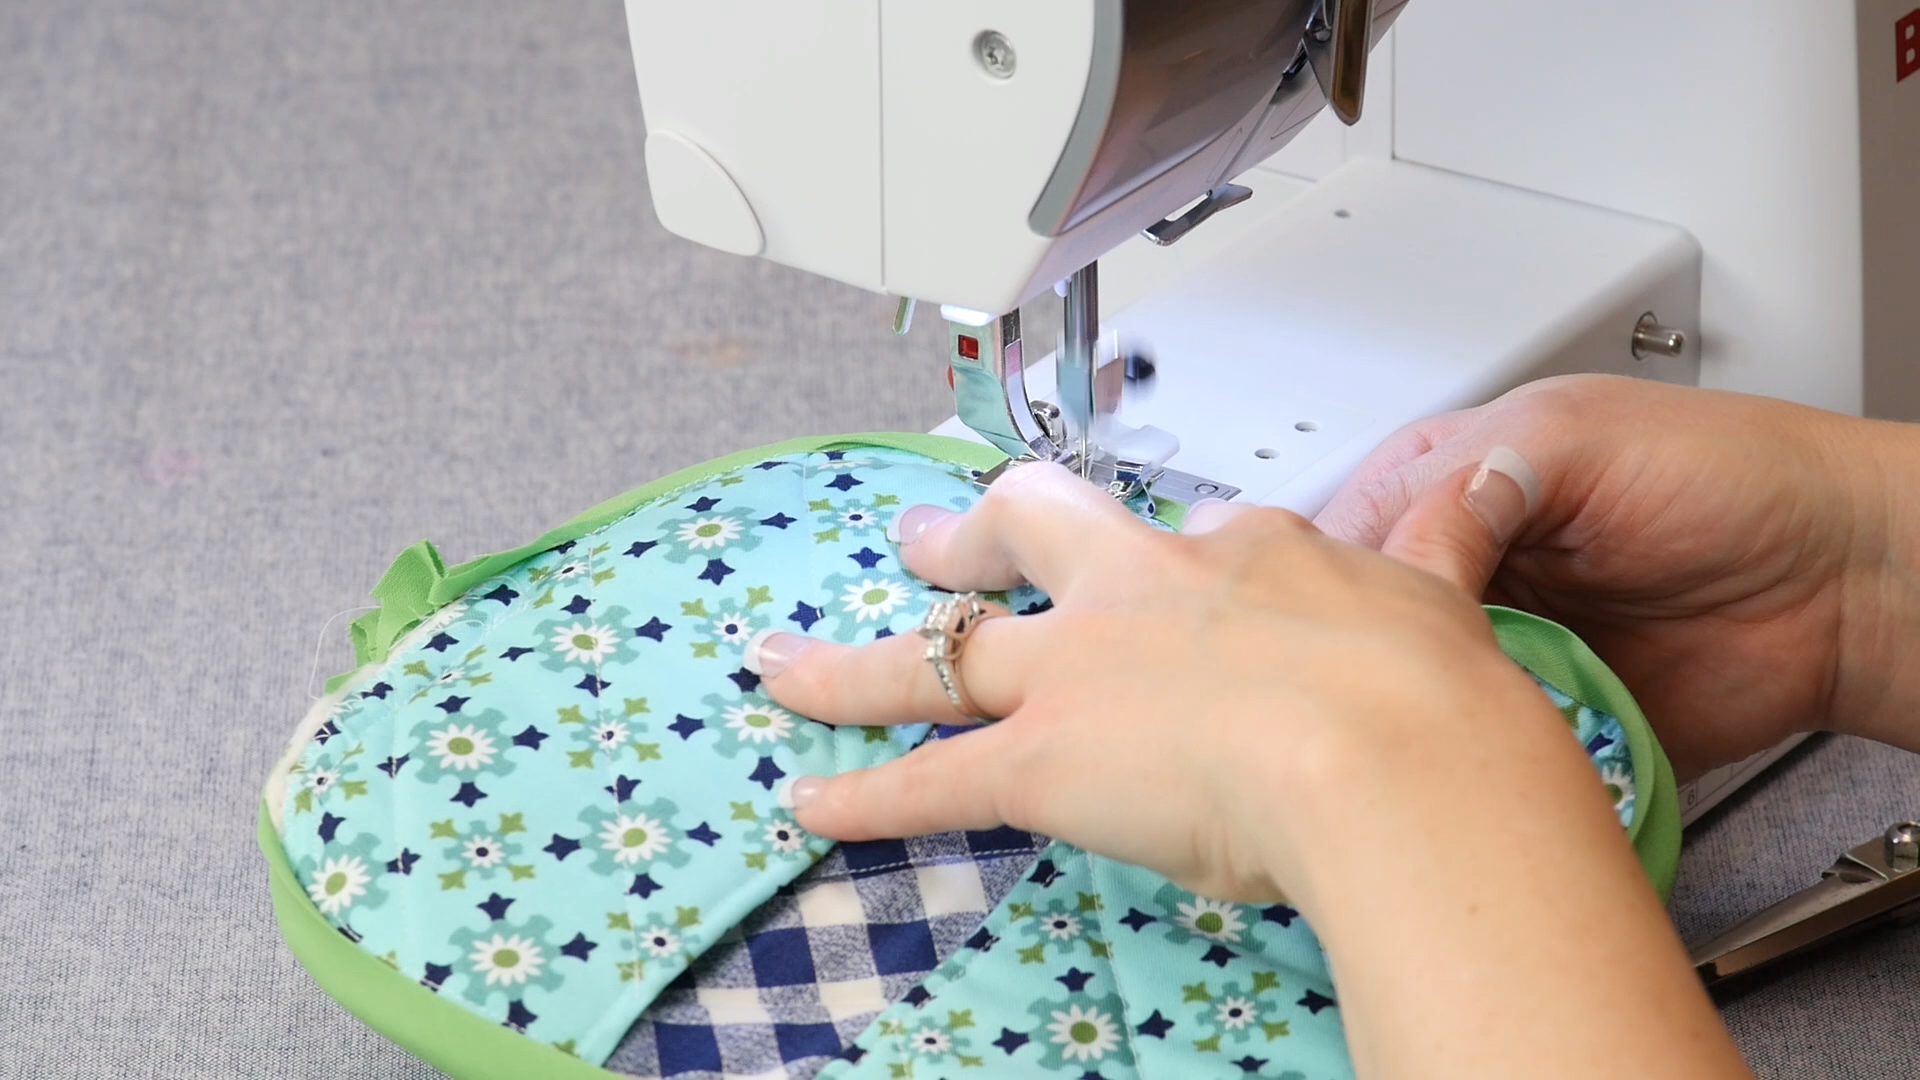 DIY Quilted Potholder (Video) -   22 simple fabric crafts Videos ideas